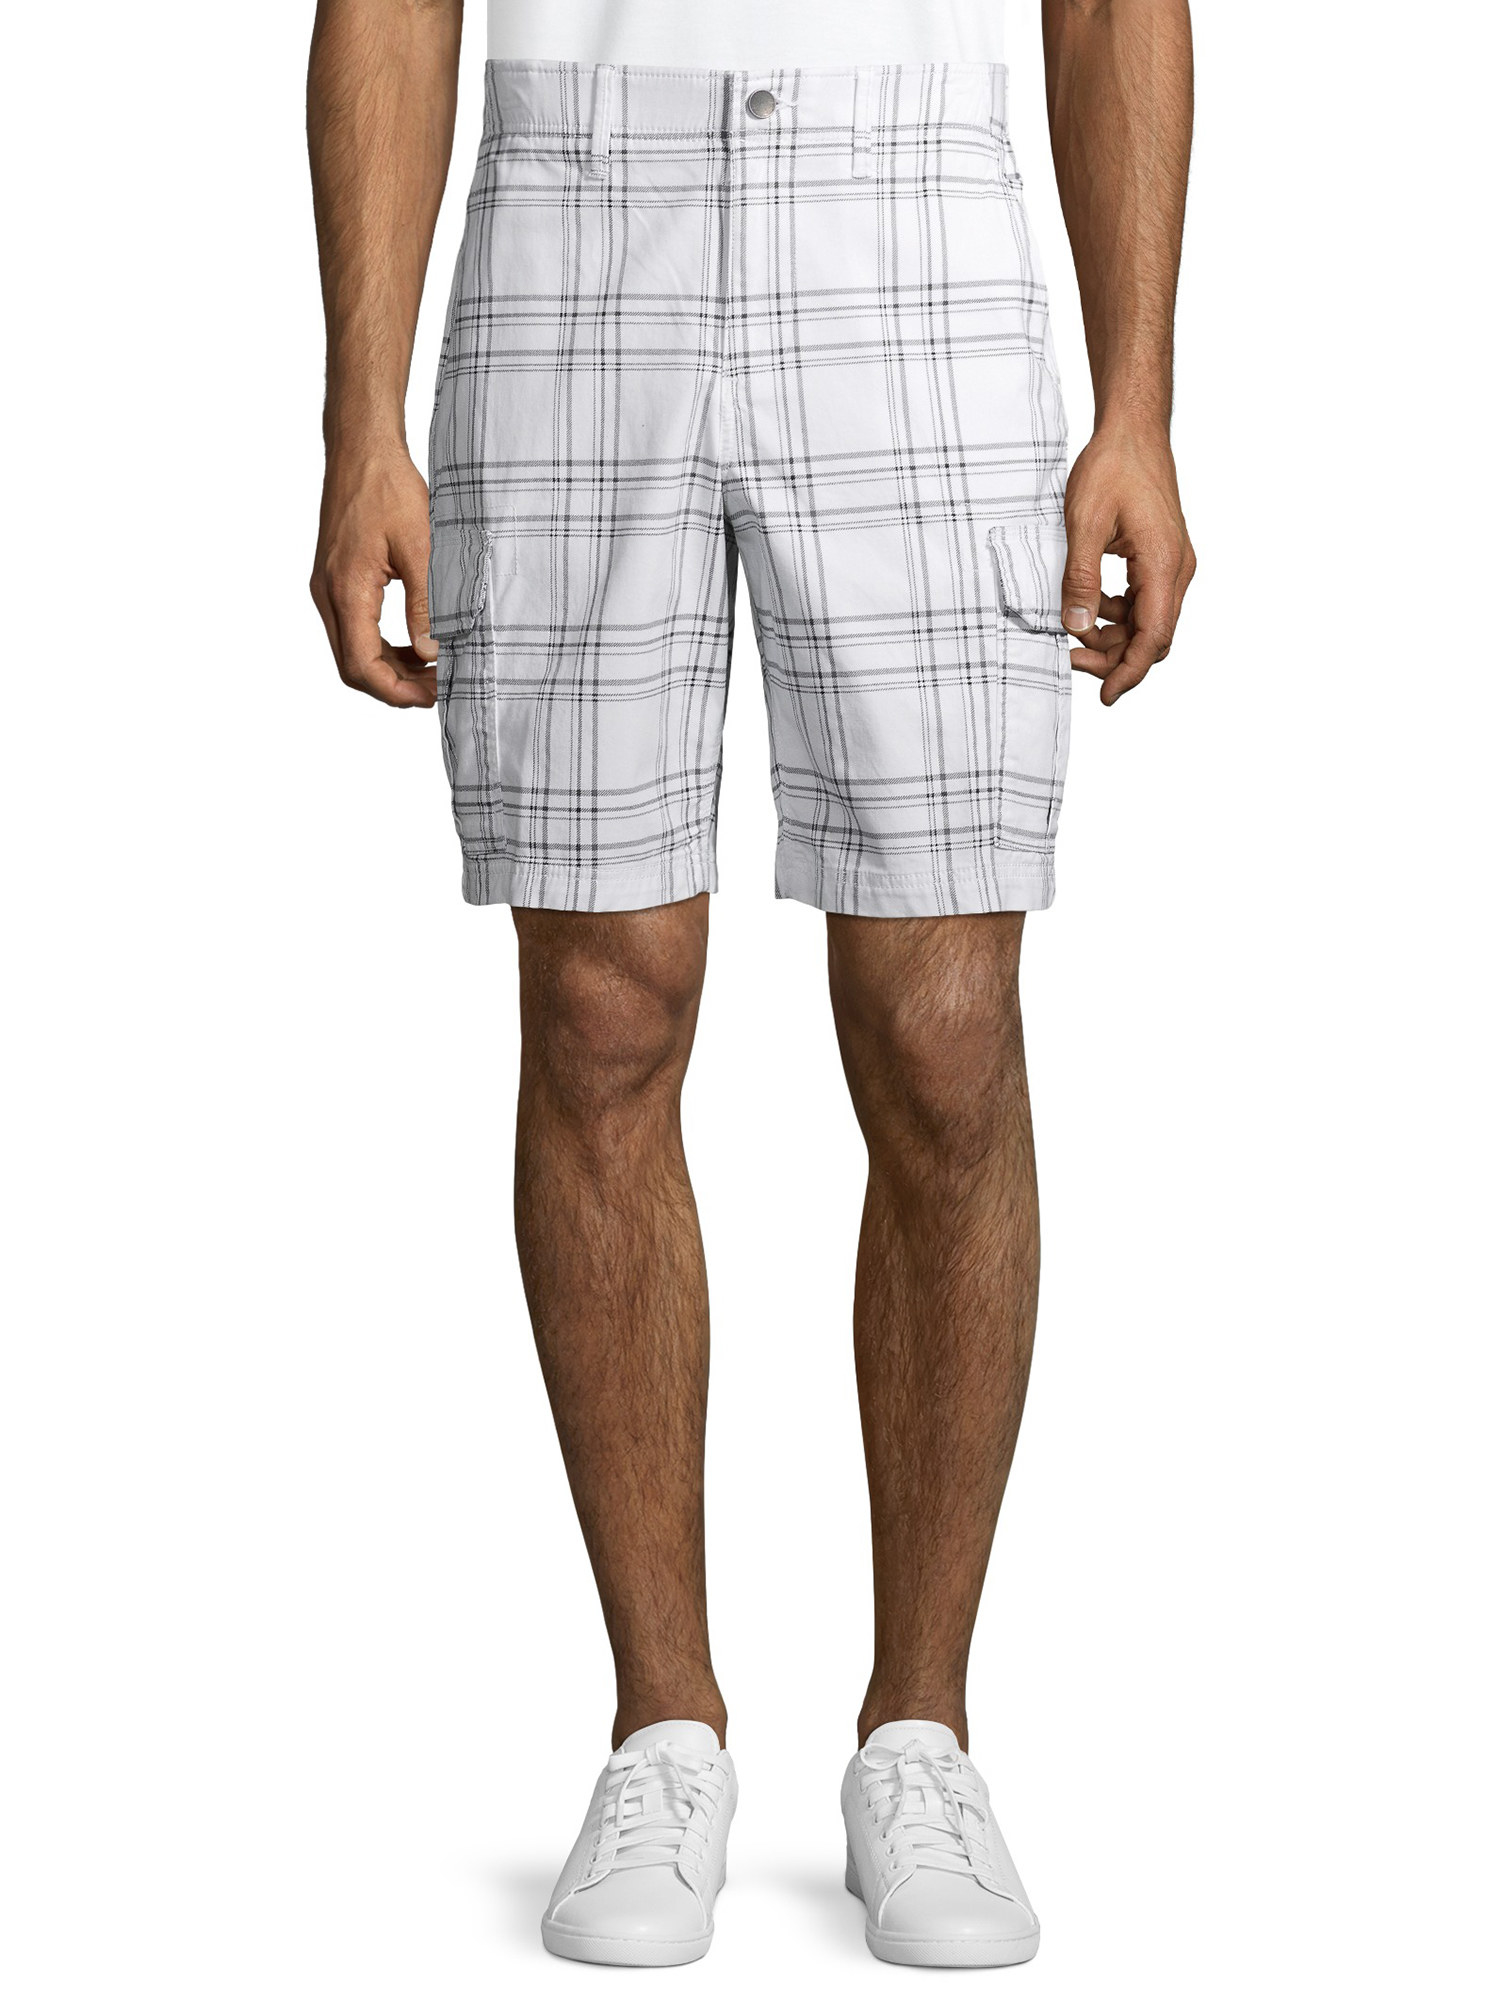 A model wearing the white and gray plaid shorts